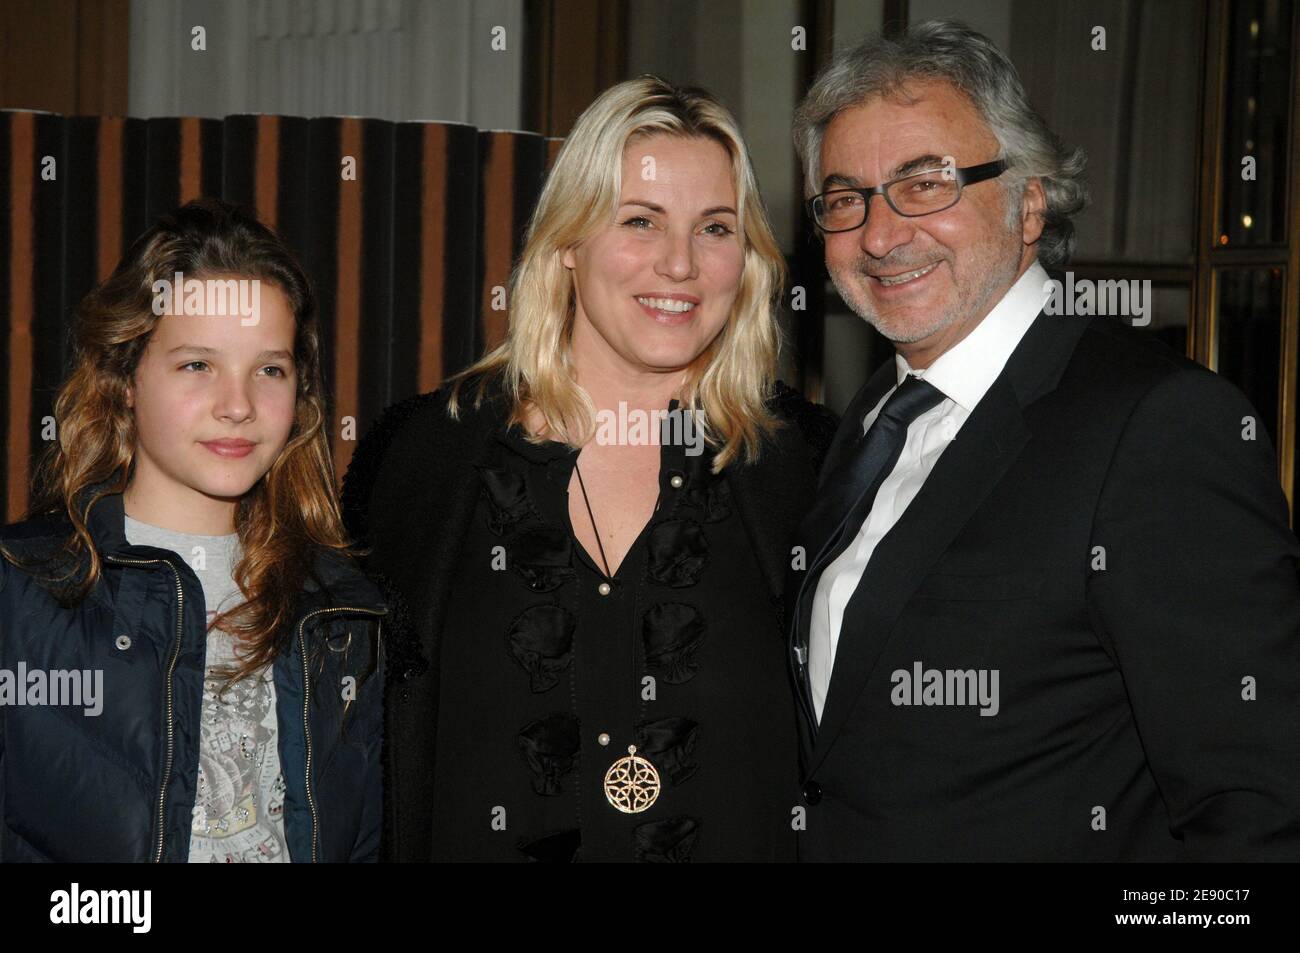 Hairdresser Franck Provost, Sophie Favier and her daughter Carla-Marie attend the unveiling of the 2008 UNICEF Calendar, held at the Baccarat headquarters in Paris, France, on November 28, 2007. Photo by Nicolas Khayat/ABACAPRESS.COM Stock Photo